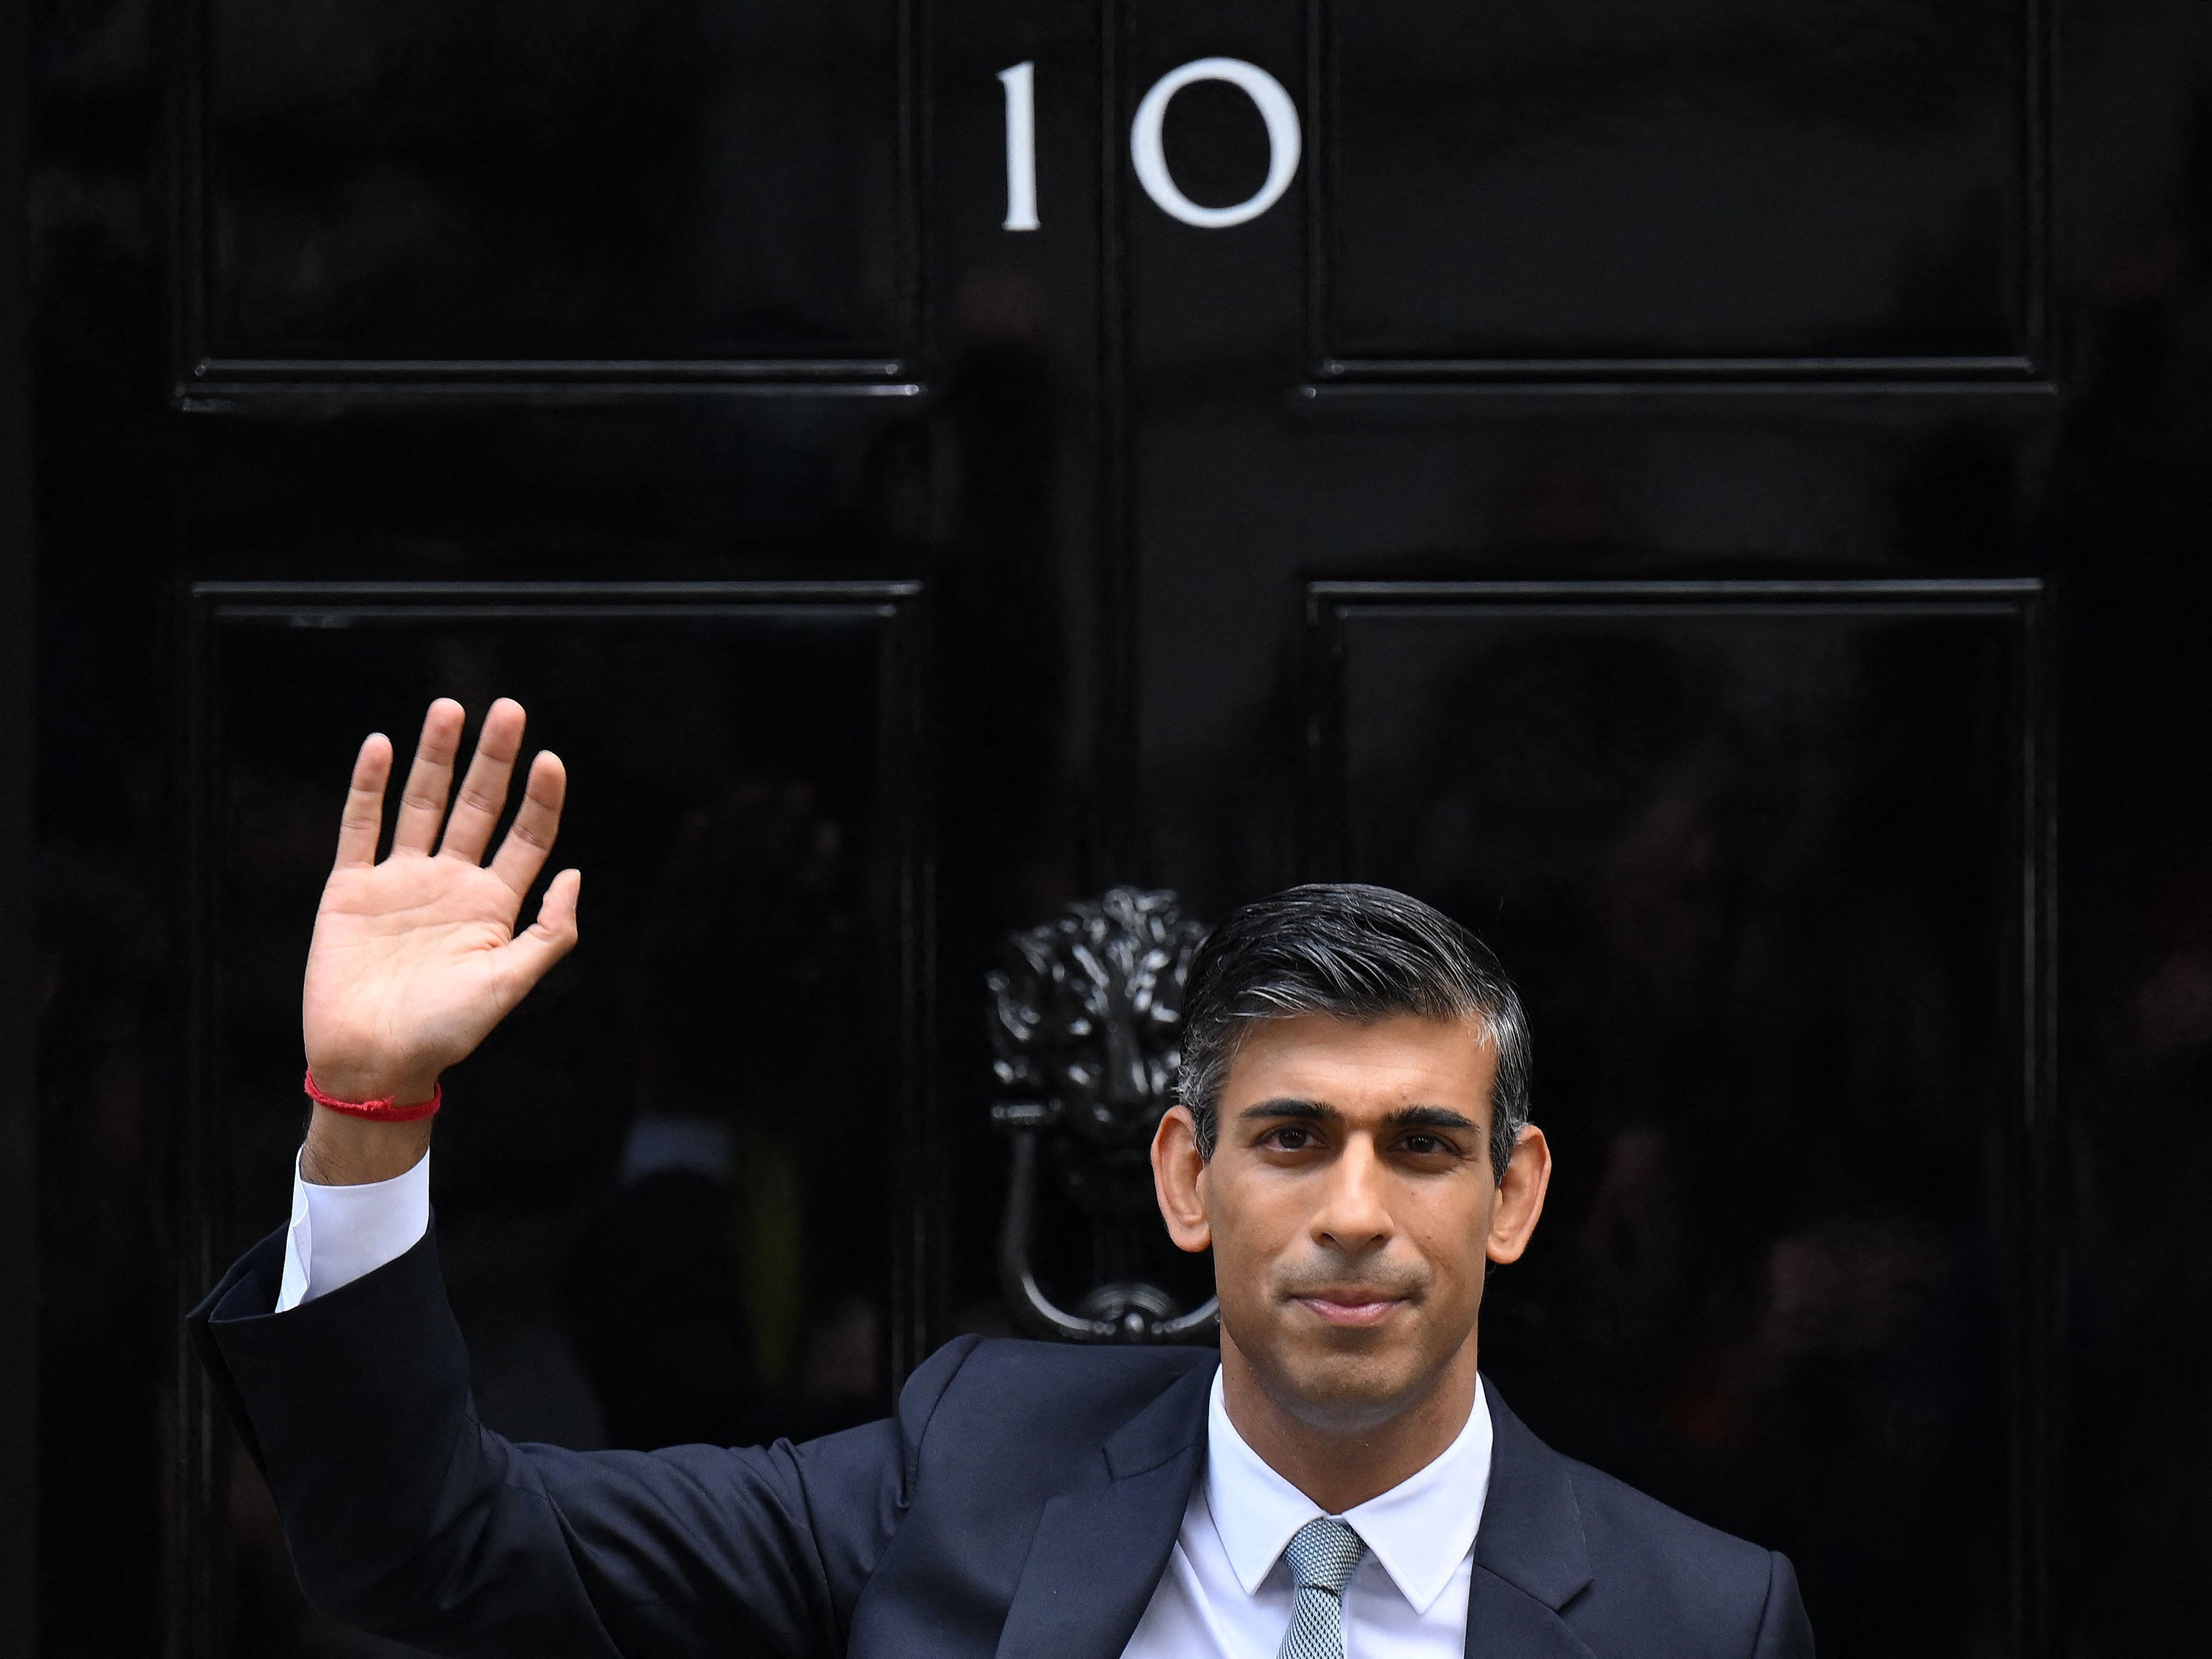 Rishi Sunak takes over as U.K. PM facing enormous economic and political challenges. Hawai'i Public Radio